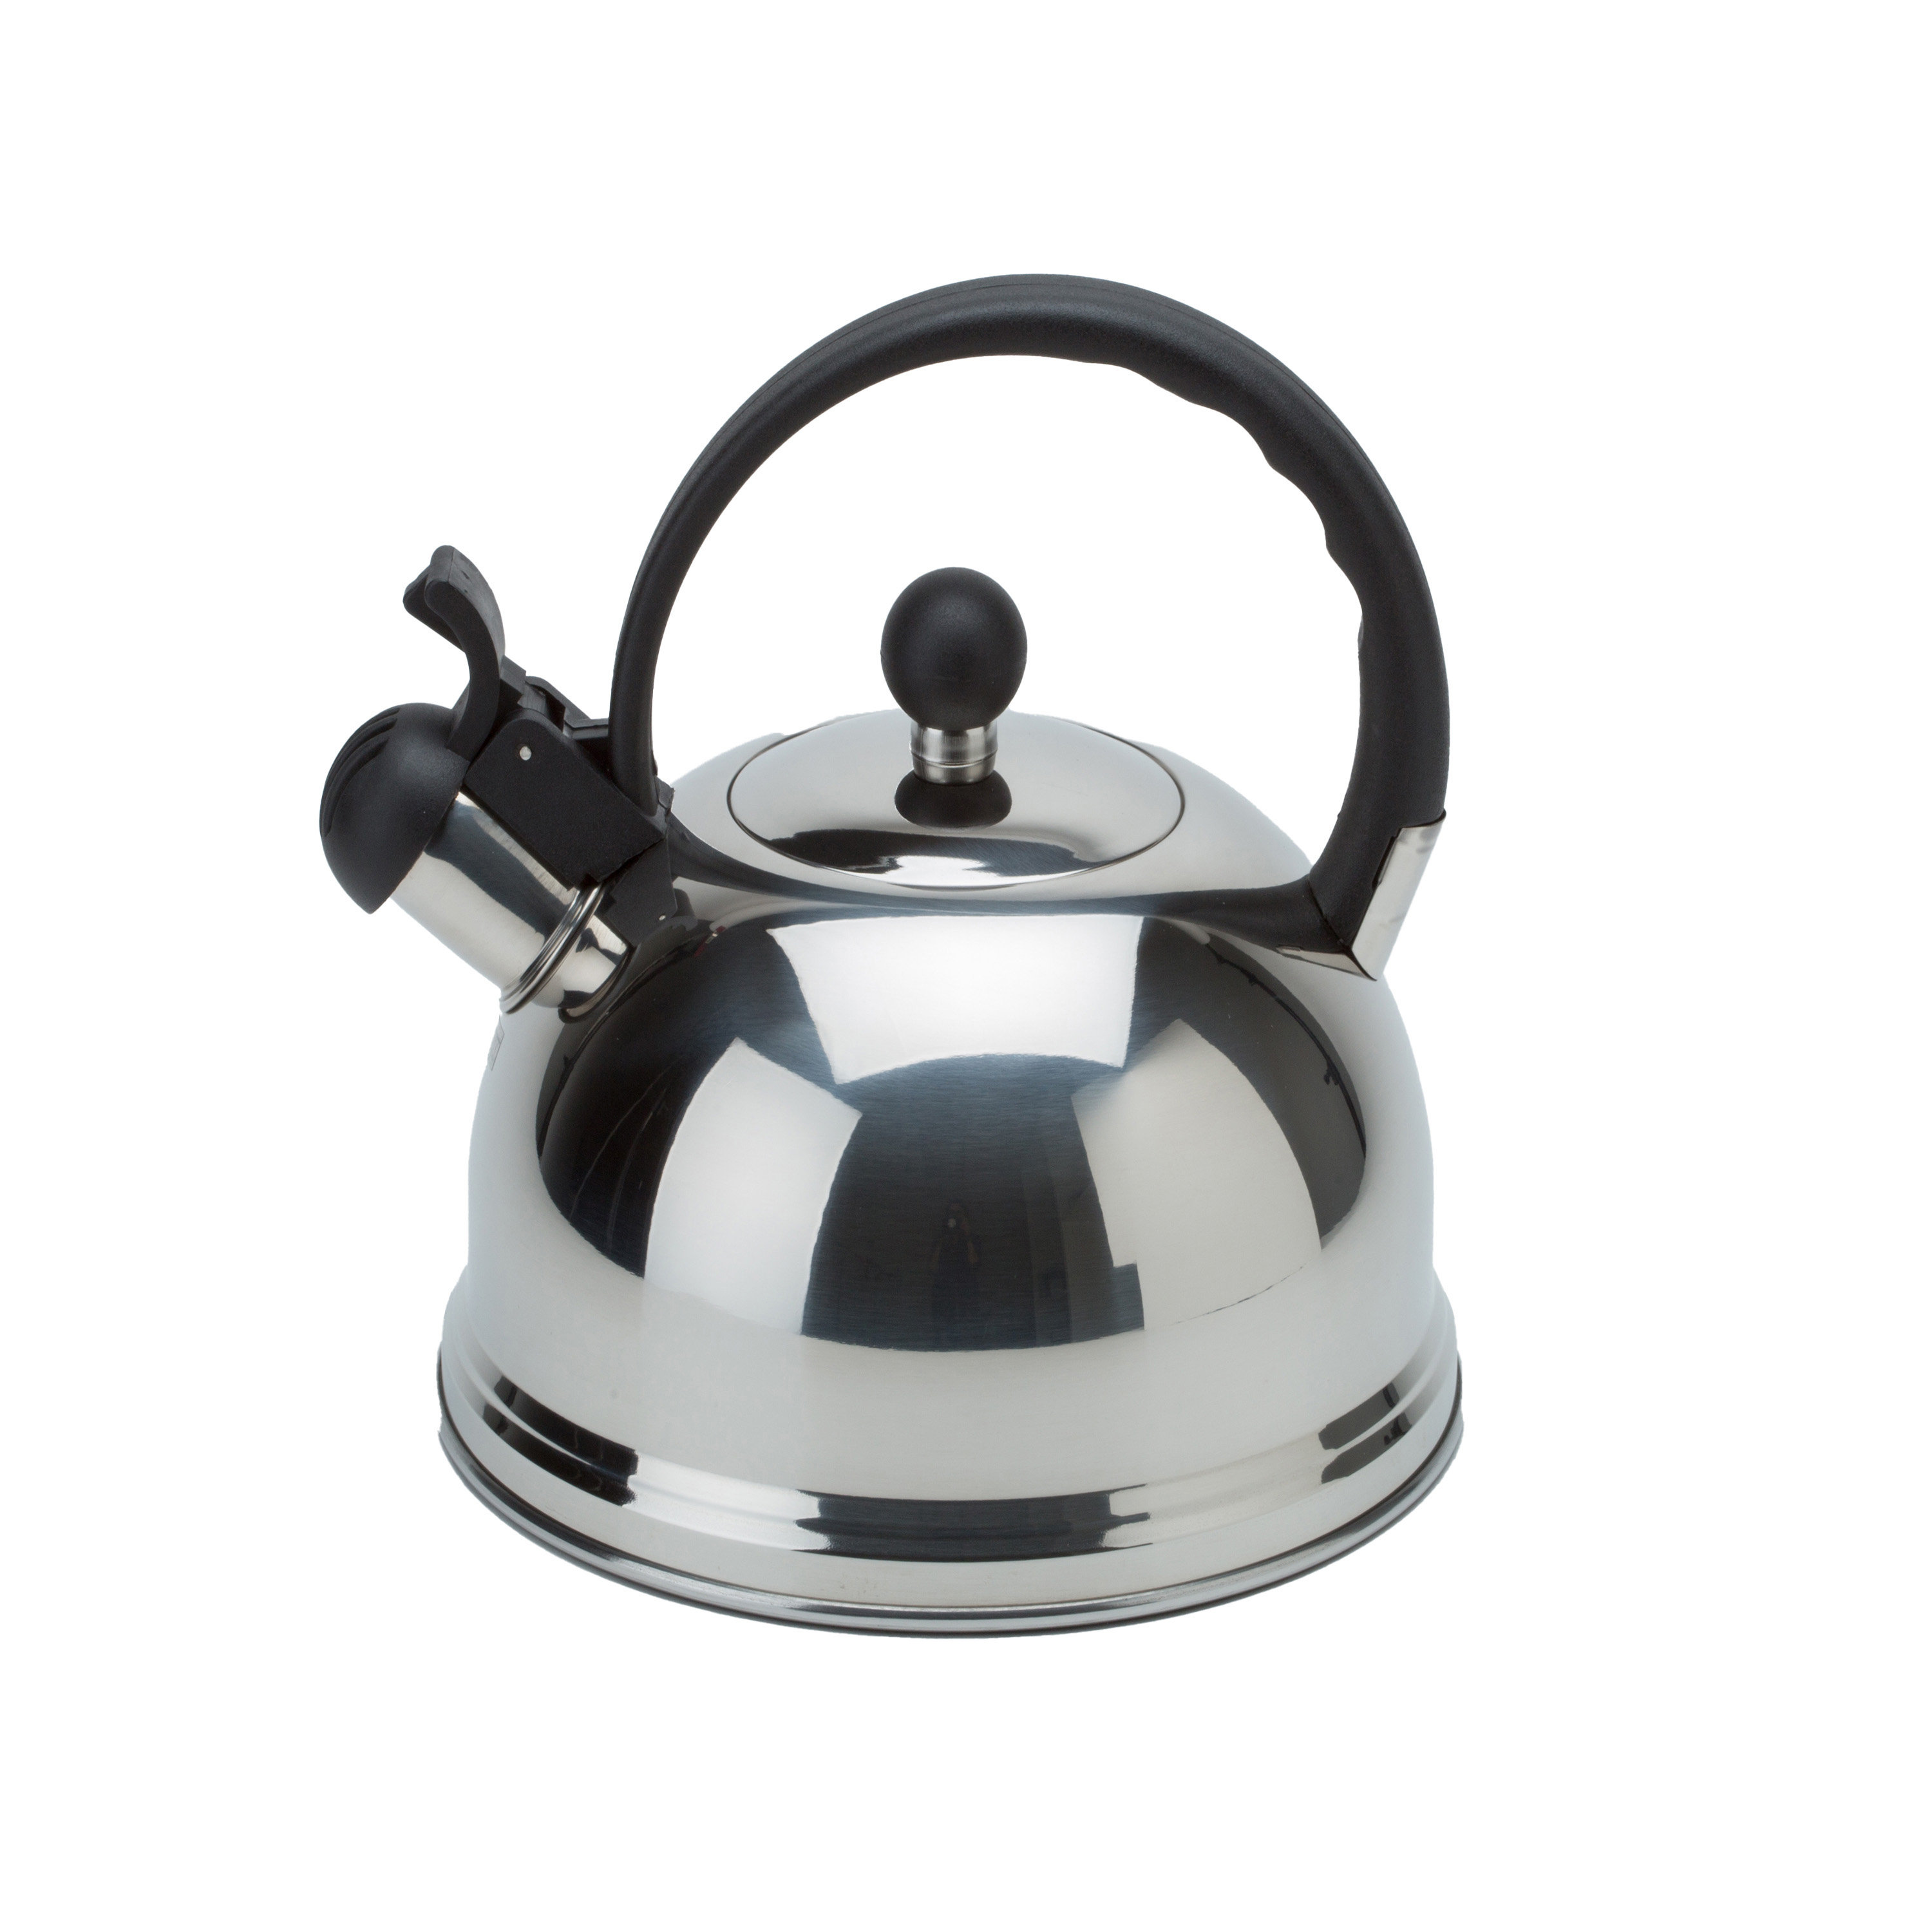 5 1/4 Qt. Stainless Steel Water Kettle Tea Pot This 5 1/4 Qt. Stainless  Steel Water Kettle is 18/10 Stainless Steel The 5 1/4 Qt. Stainless Steel  Water Kettle has a seamless spout and body to prevent leaking.